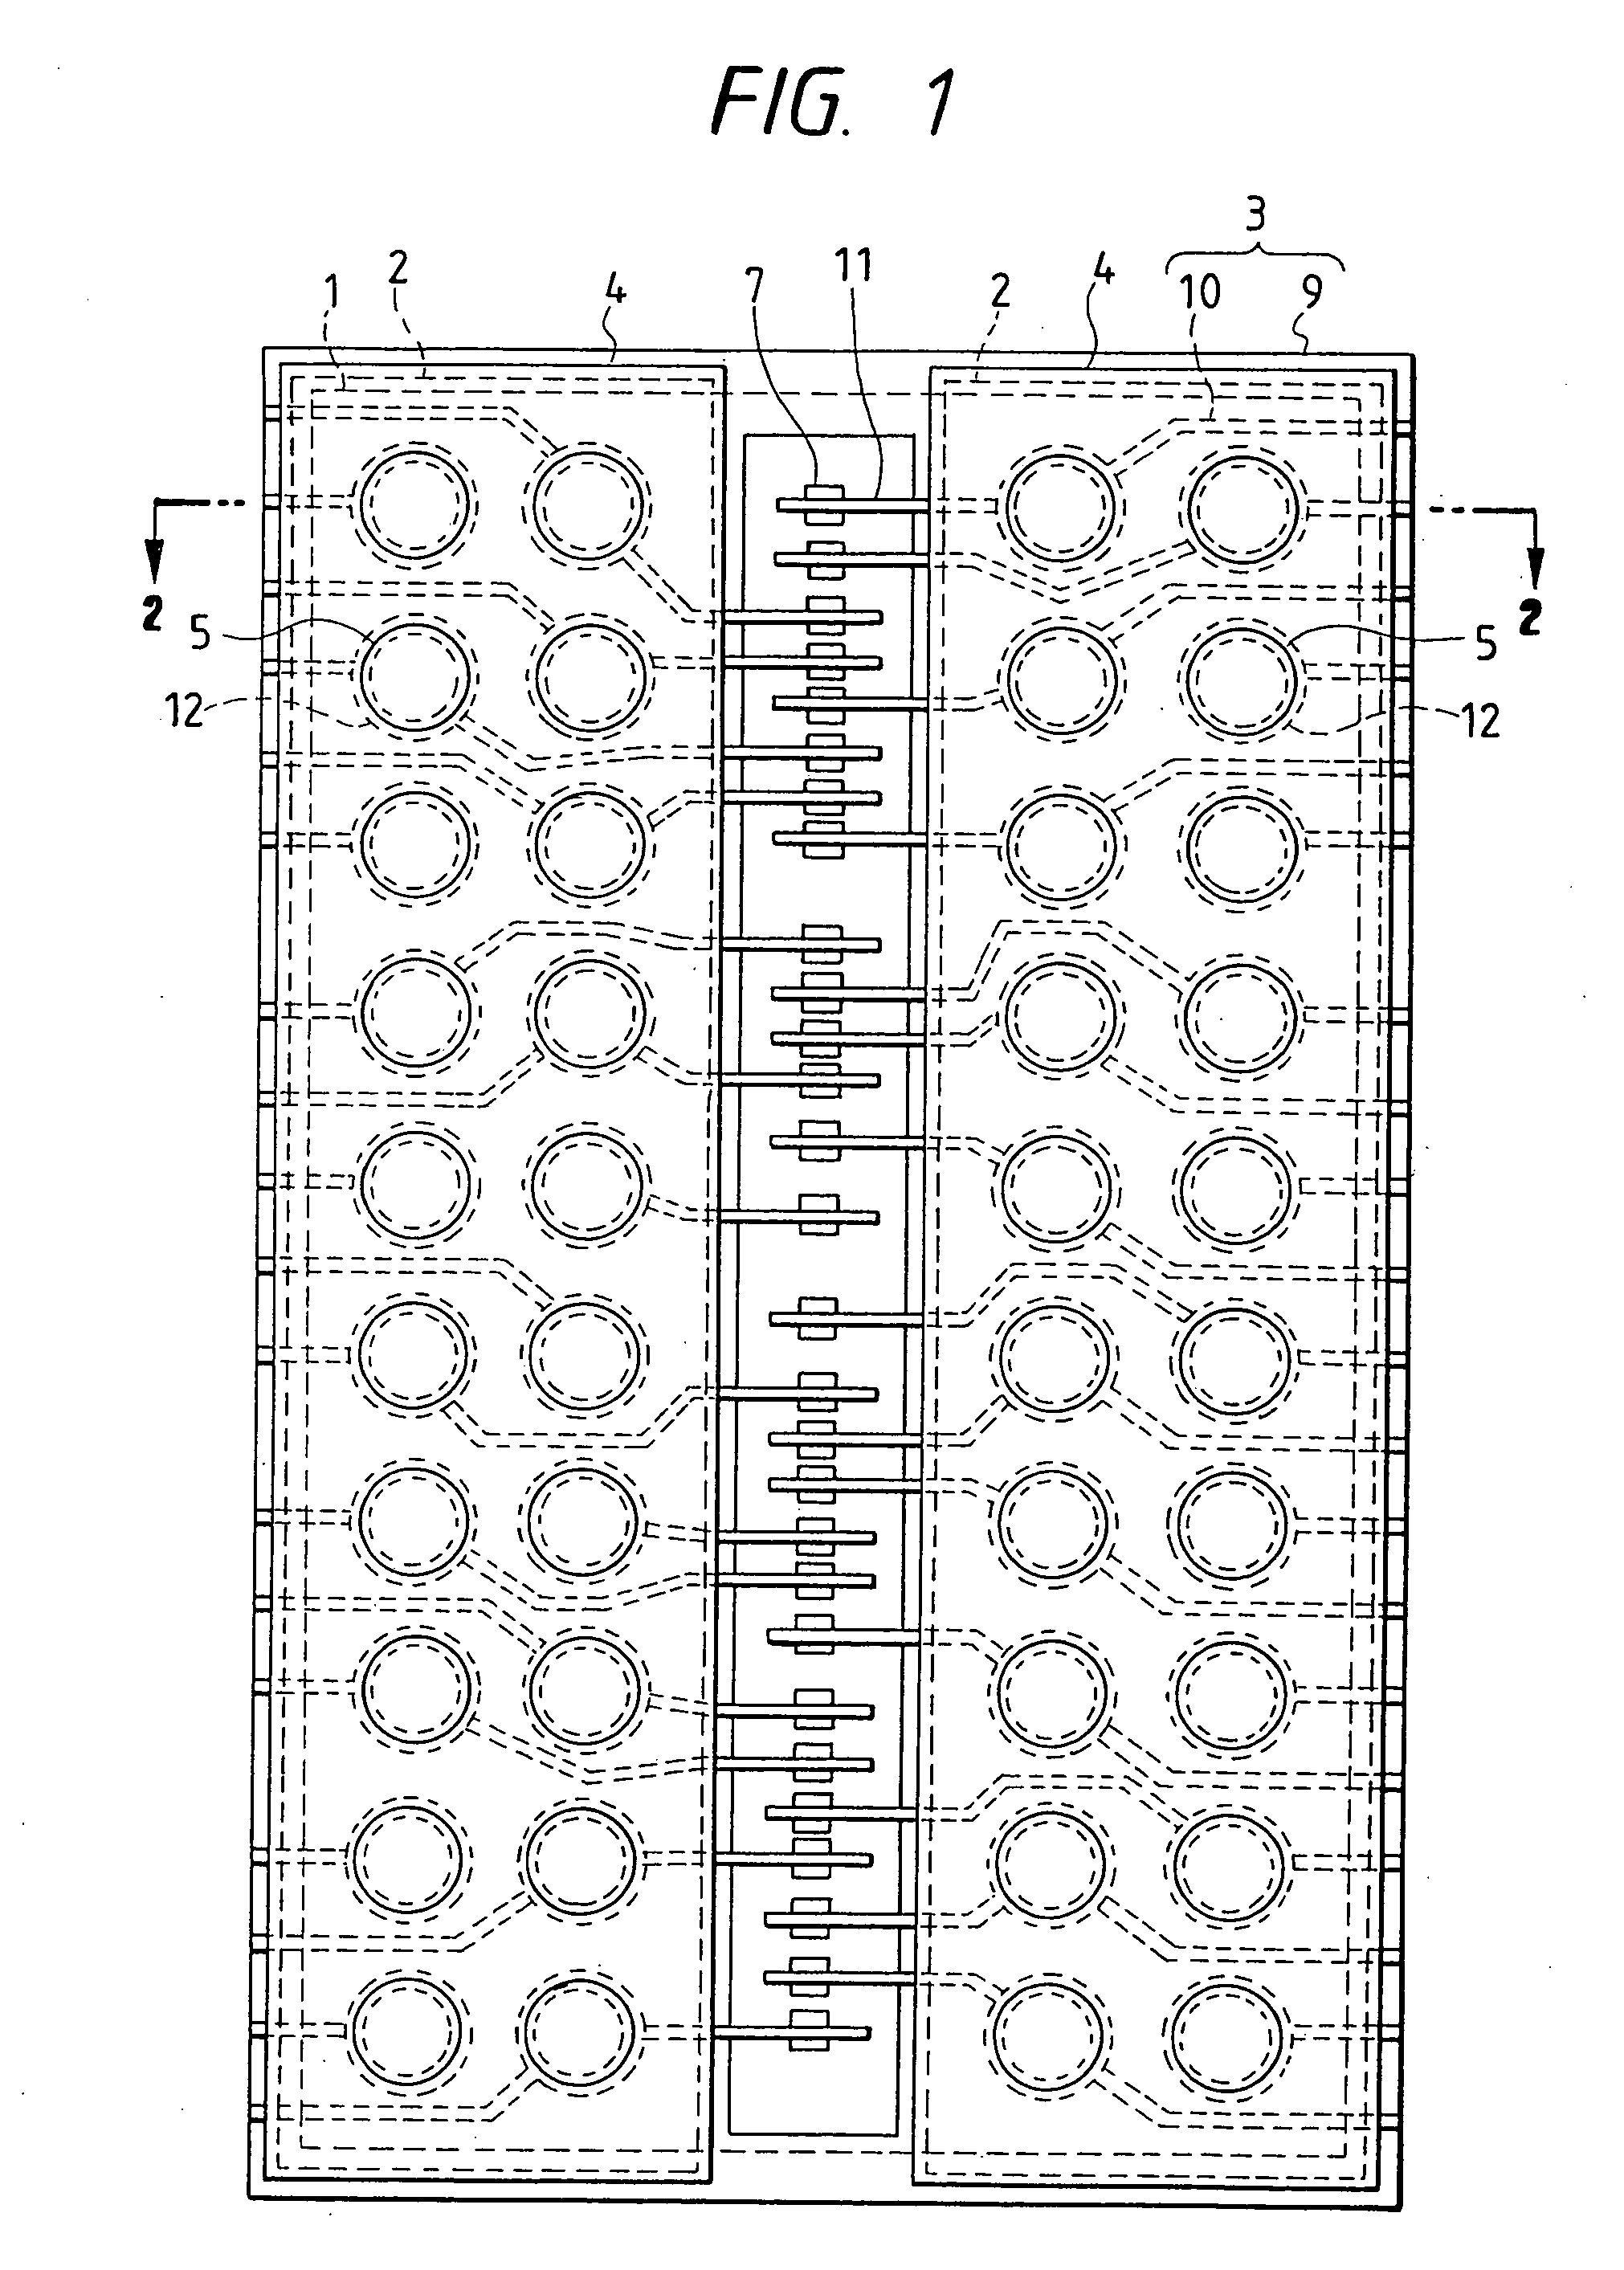 Semiconductor device and manufacturing metthod thereof